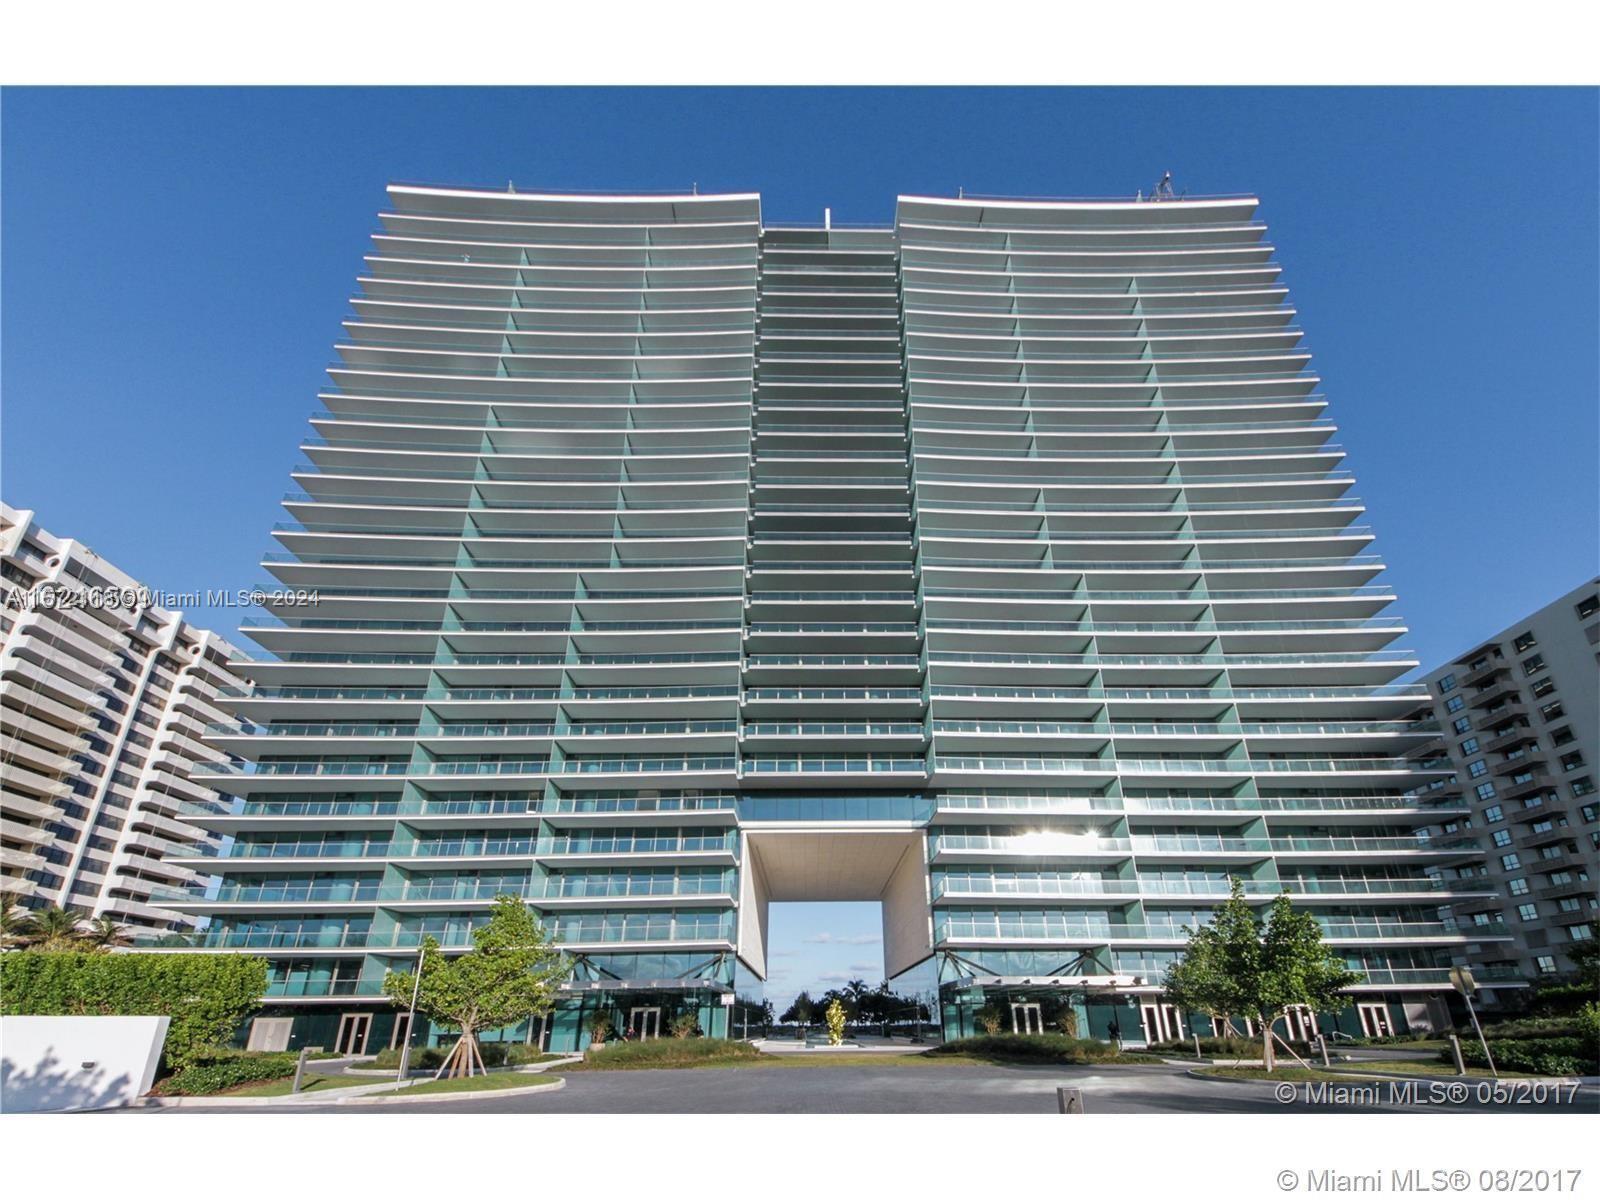 Photo of 10201 Collins Ave #1005 in Bal Harbour, FL